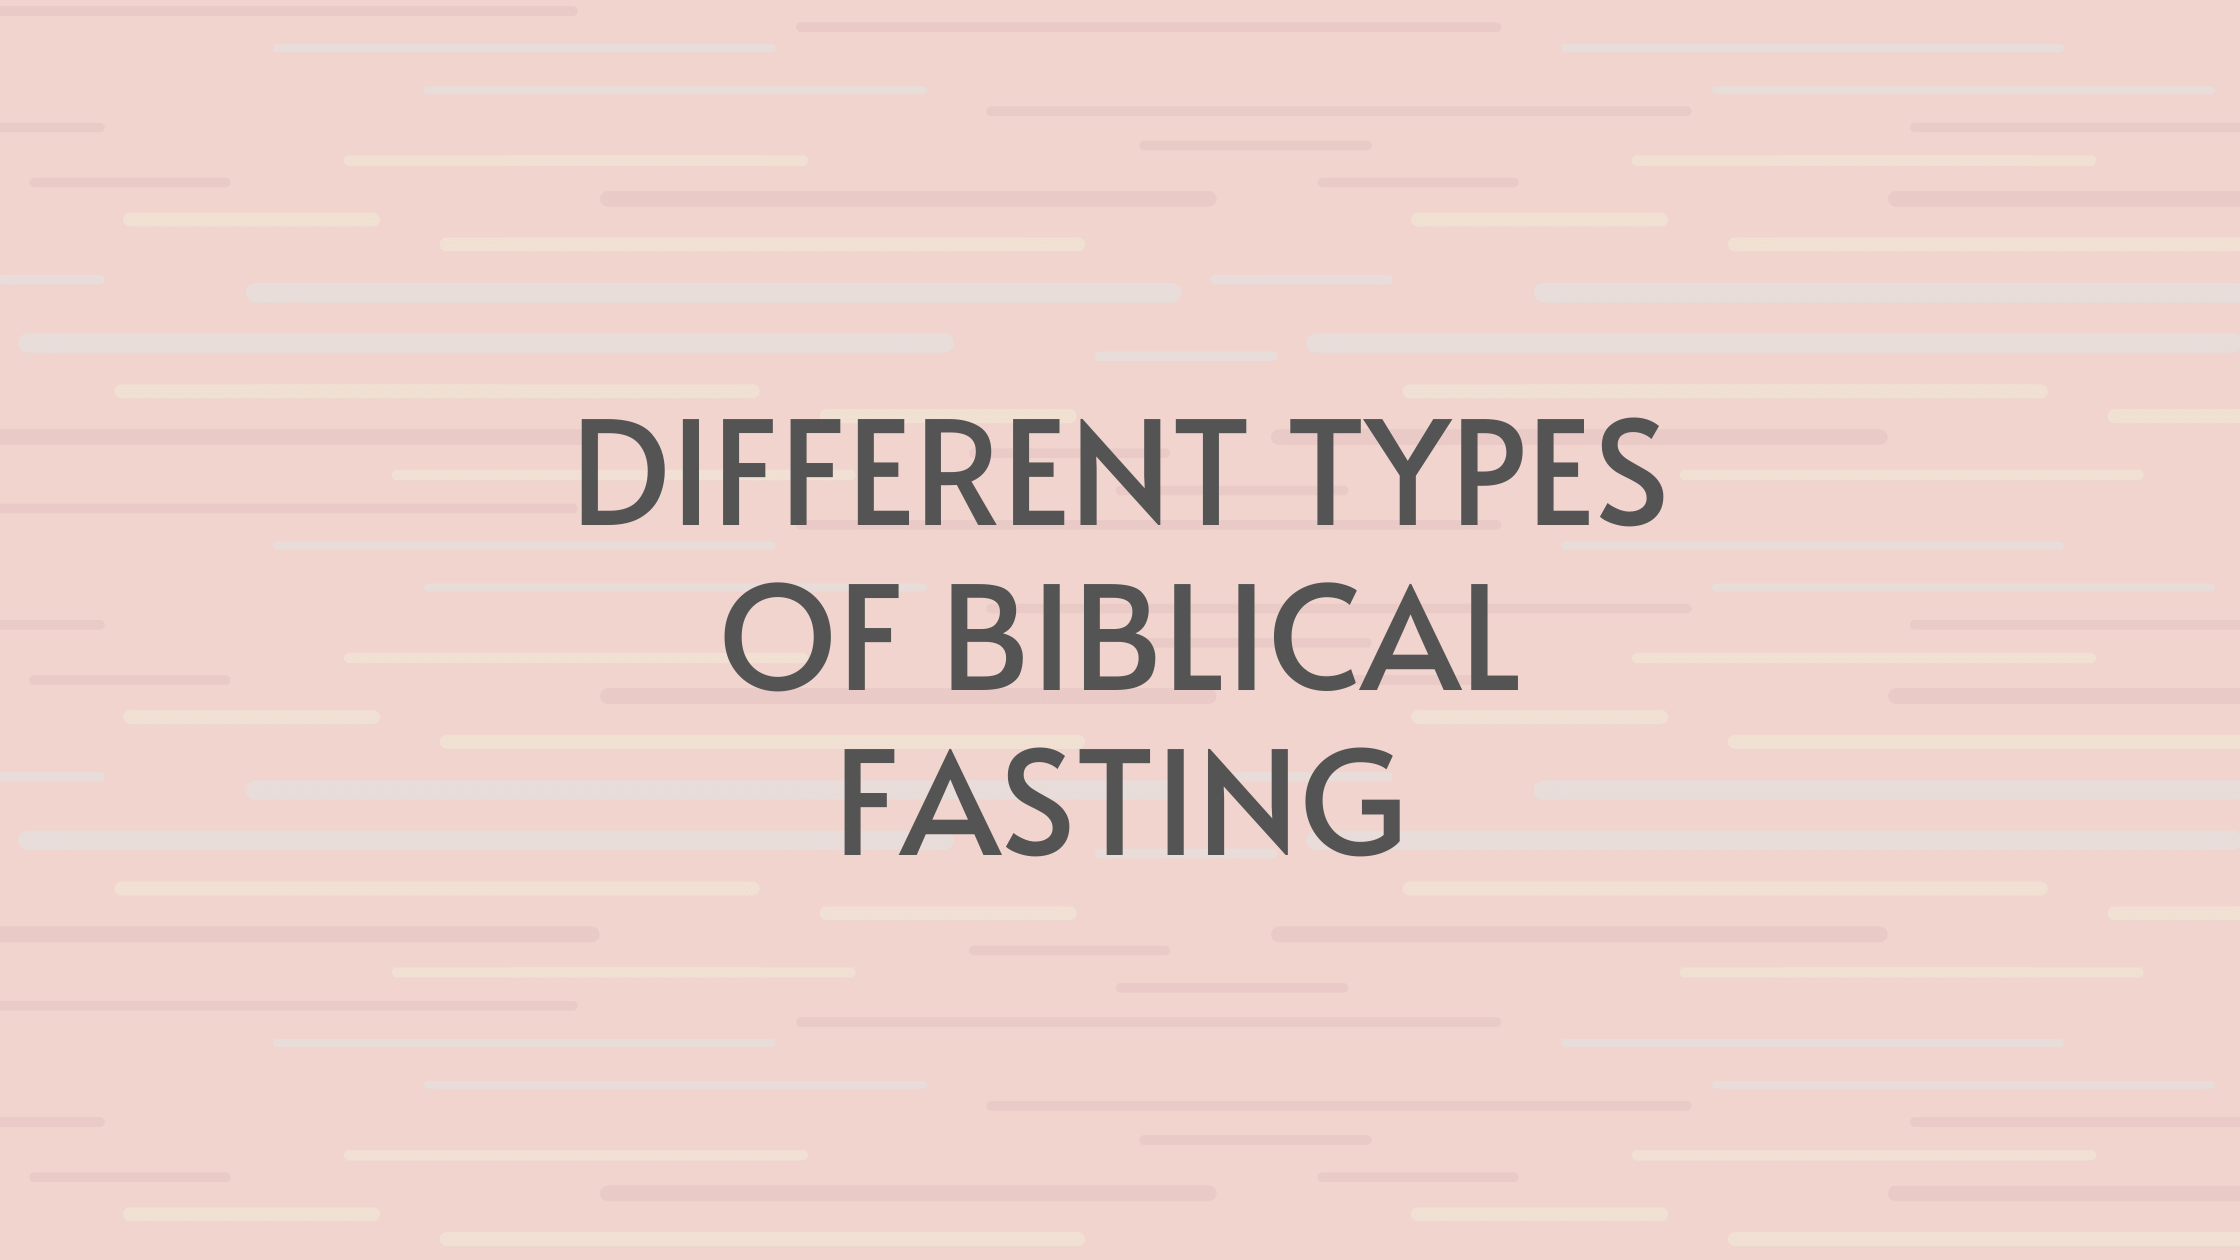 Different Types of Biblical Fasting